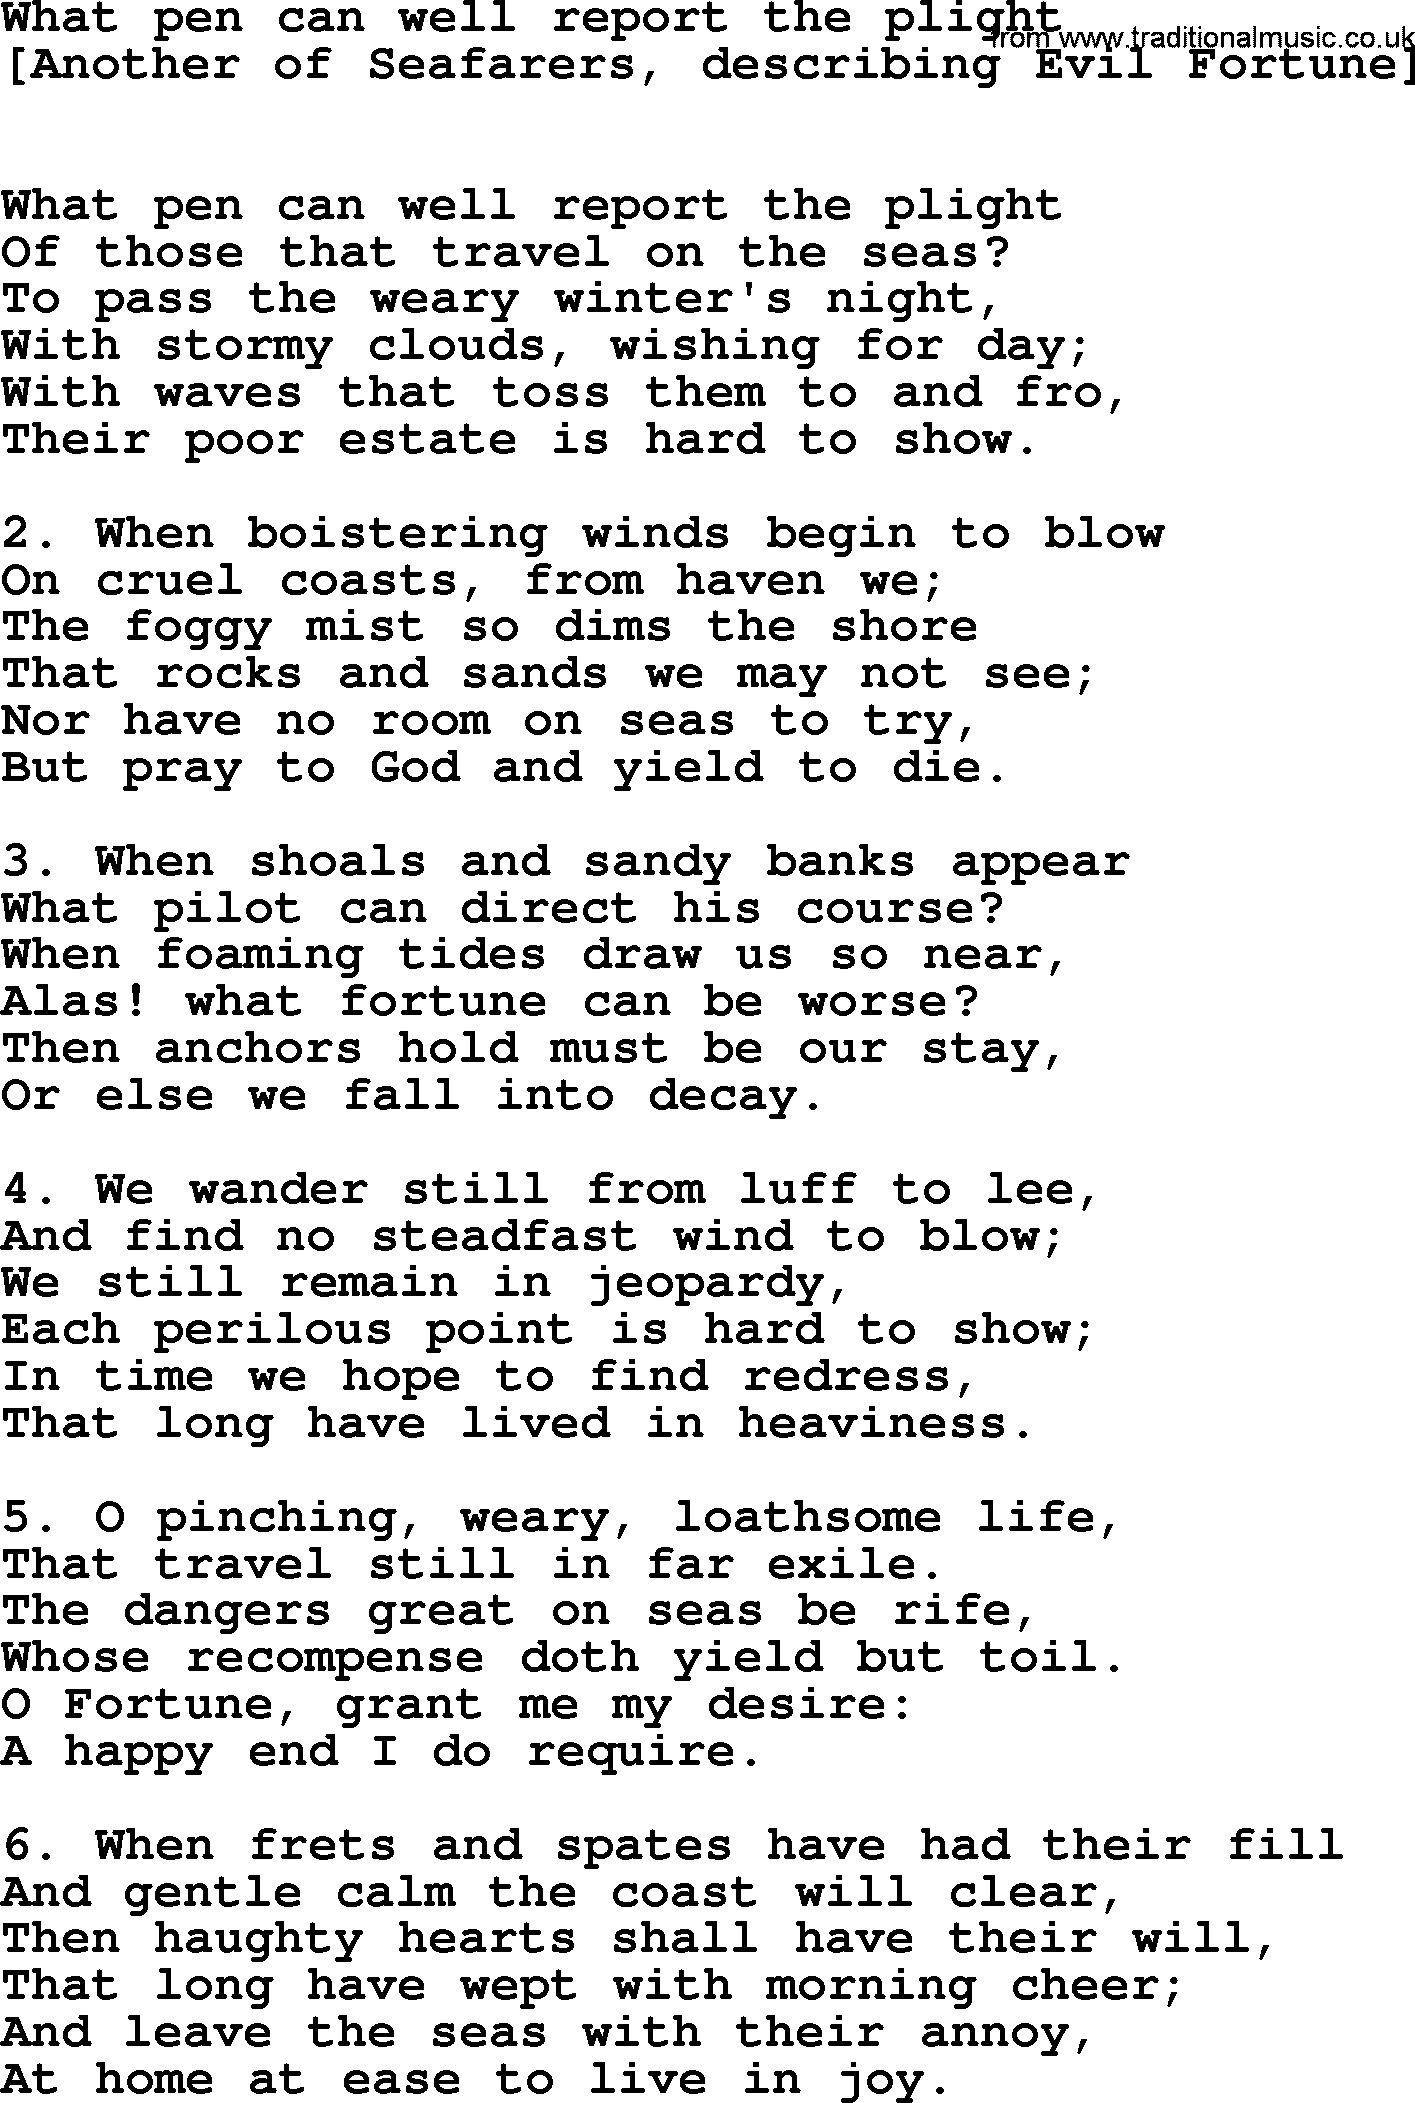 Old English Song: What Pen Can Well Report The Plight lyrics